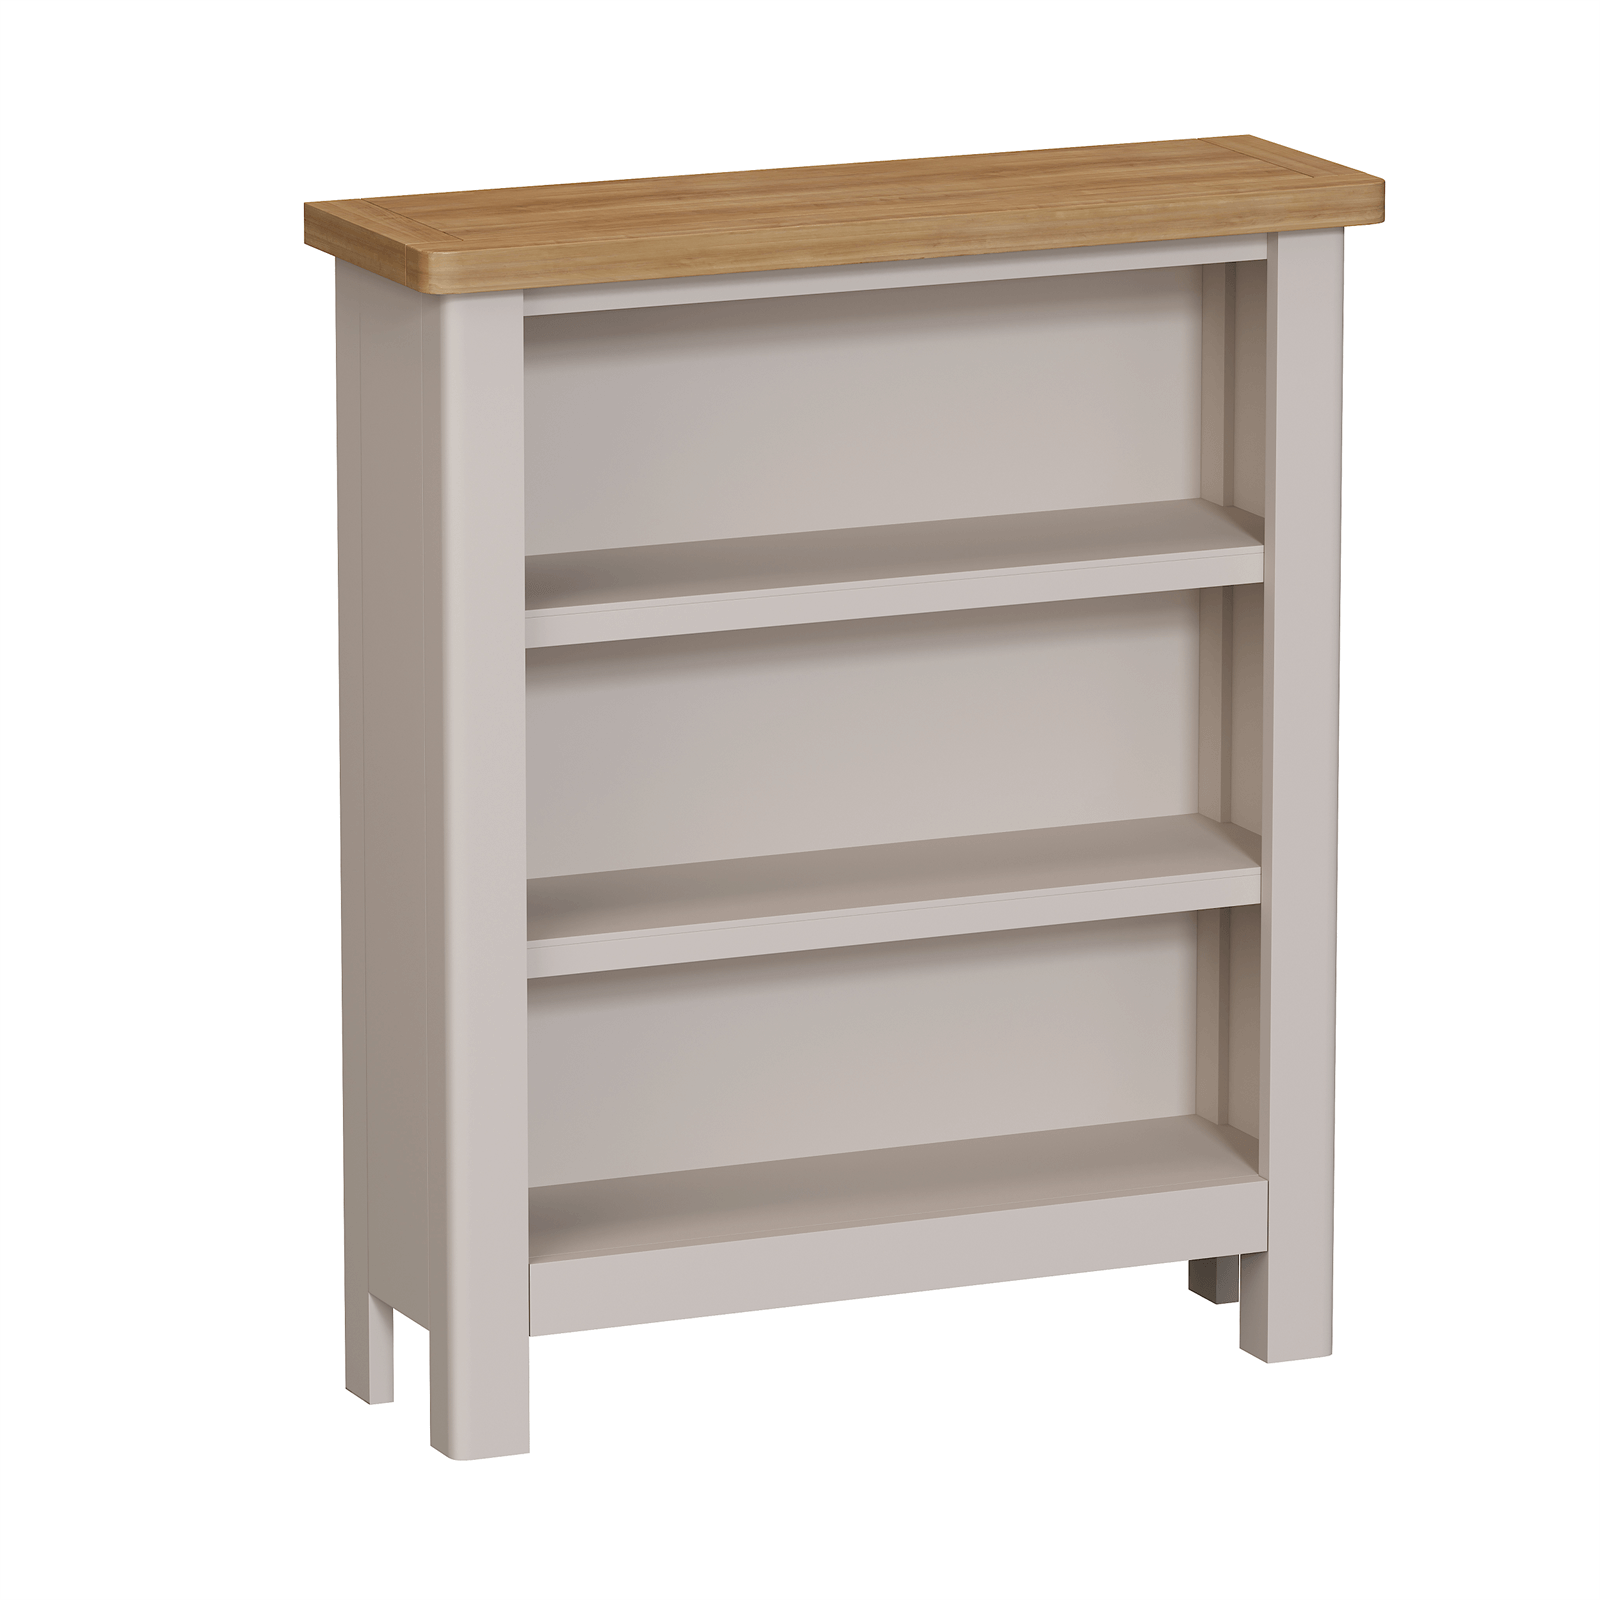 Padstow Bookcase - Truffle